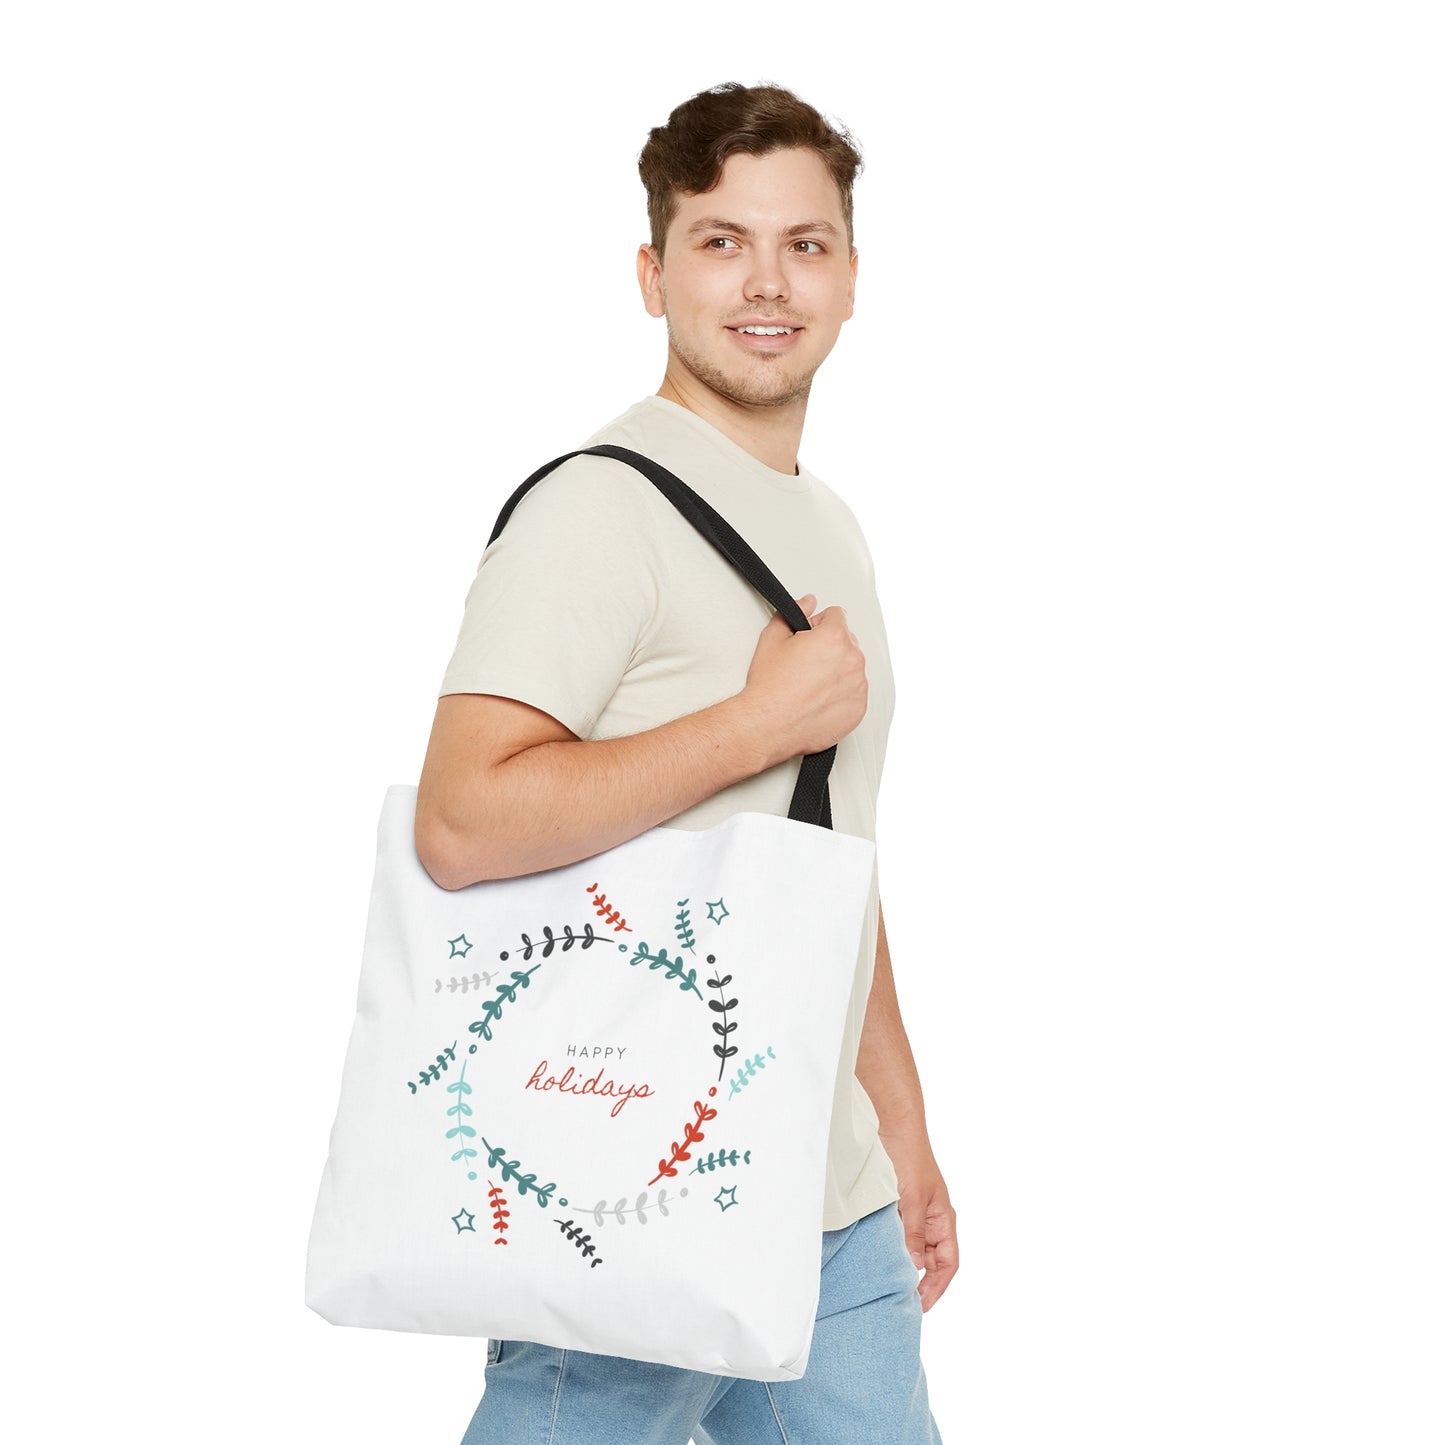 Happy Holidays Printed Tote Bags